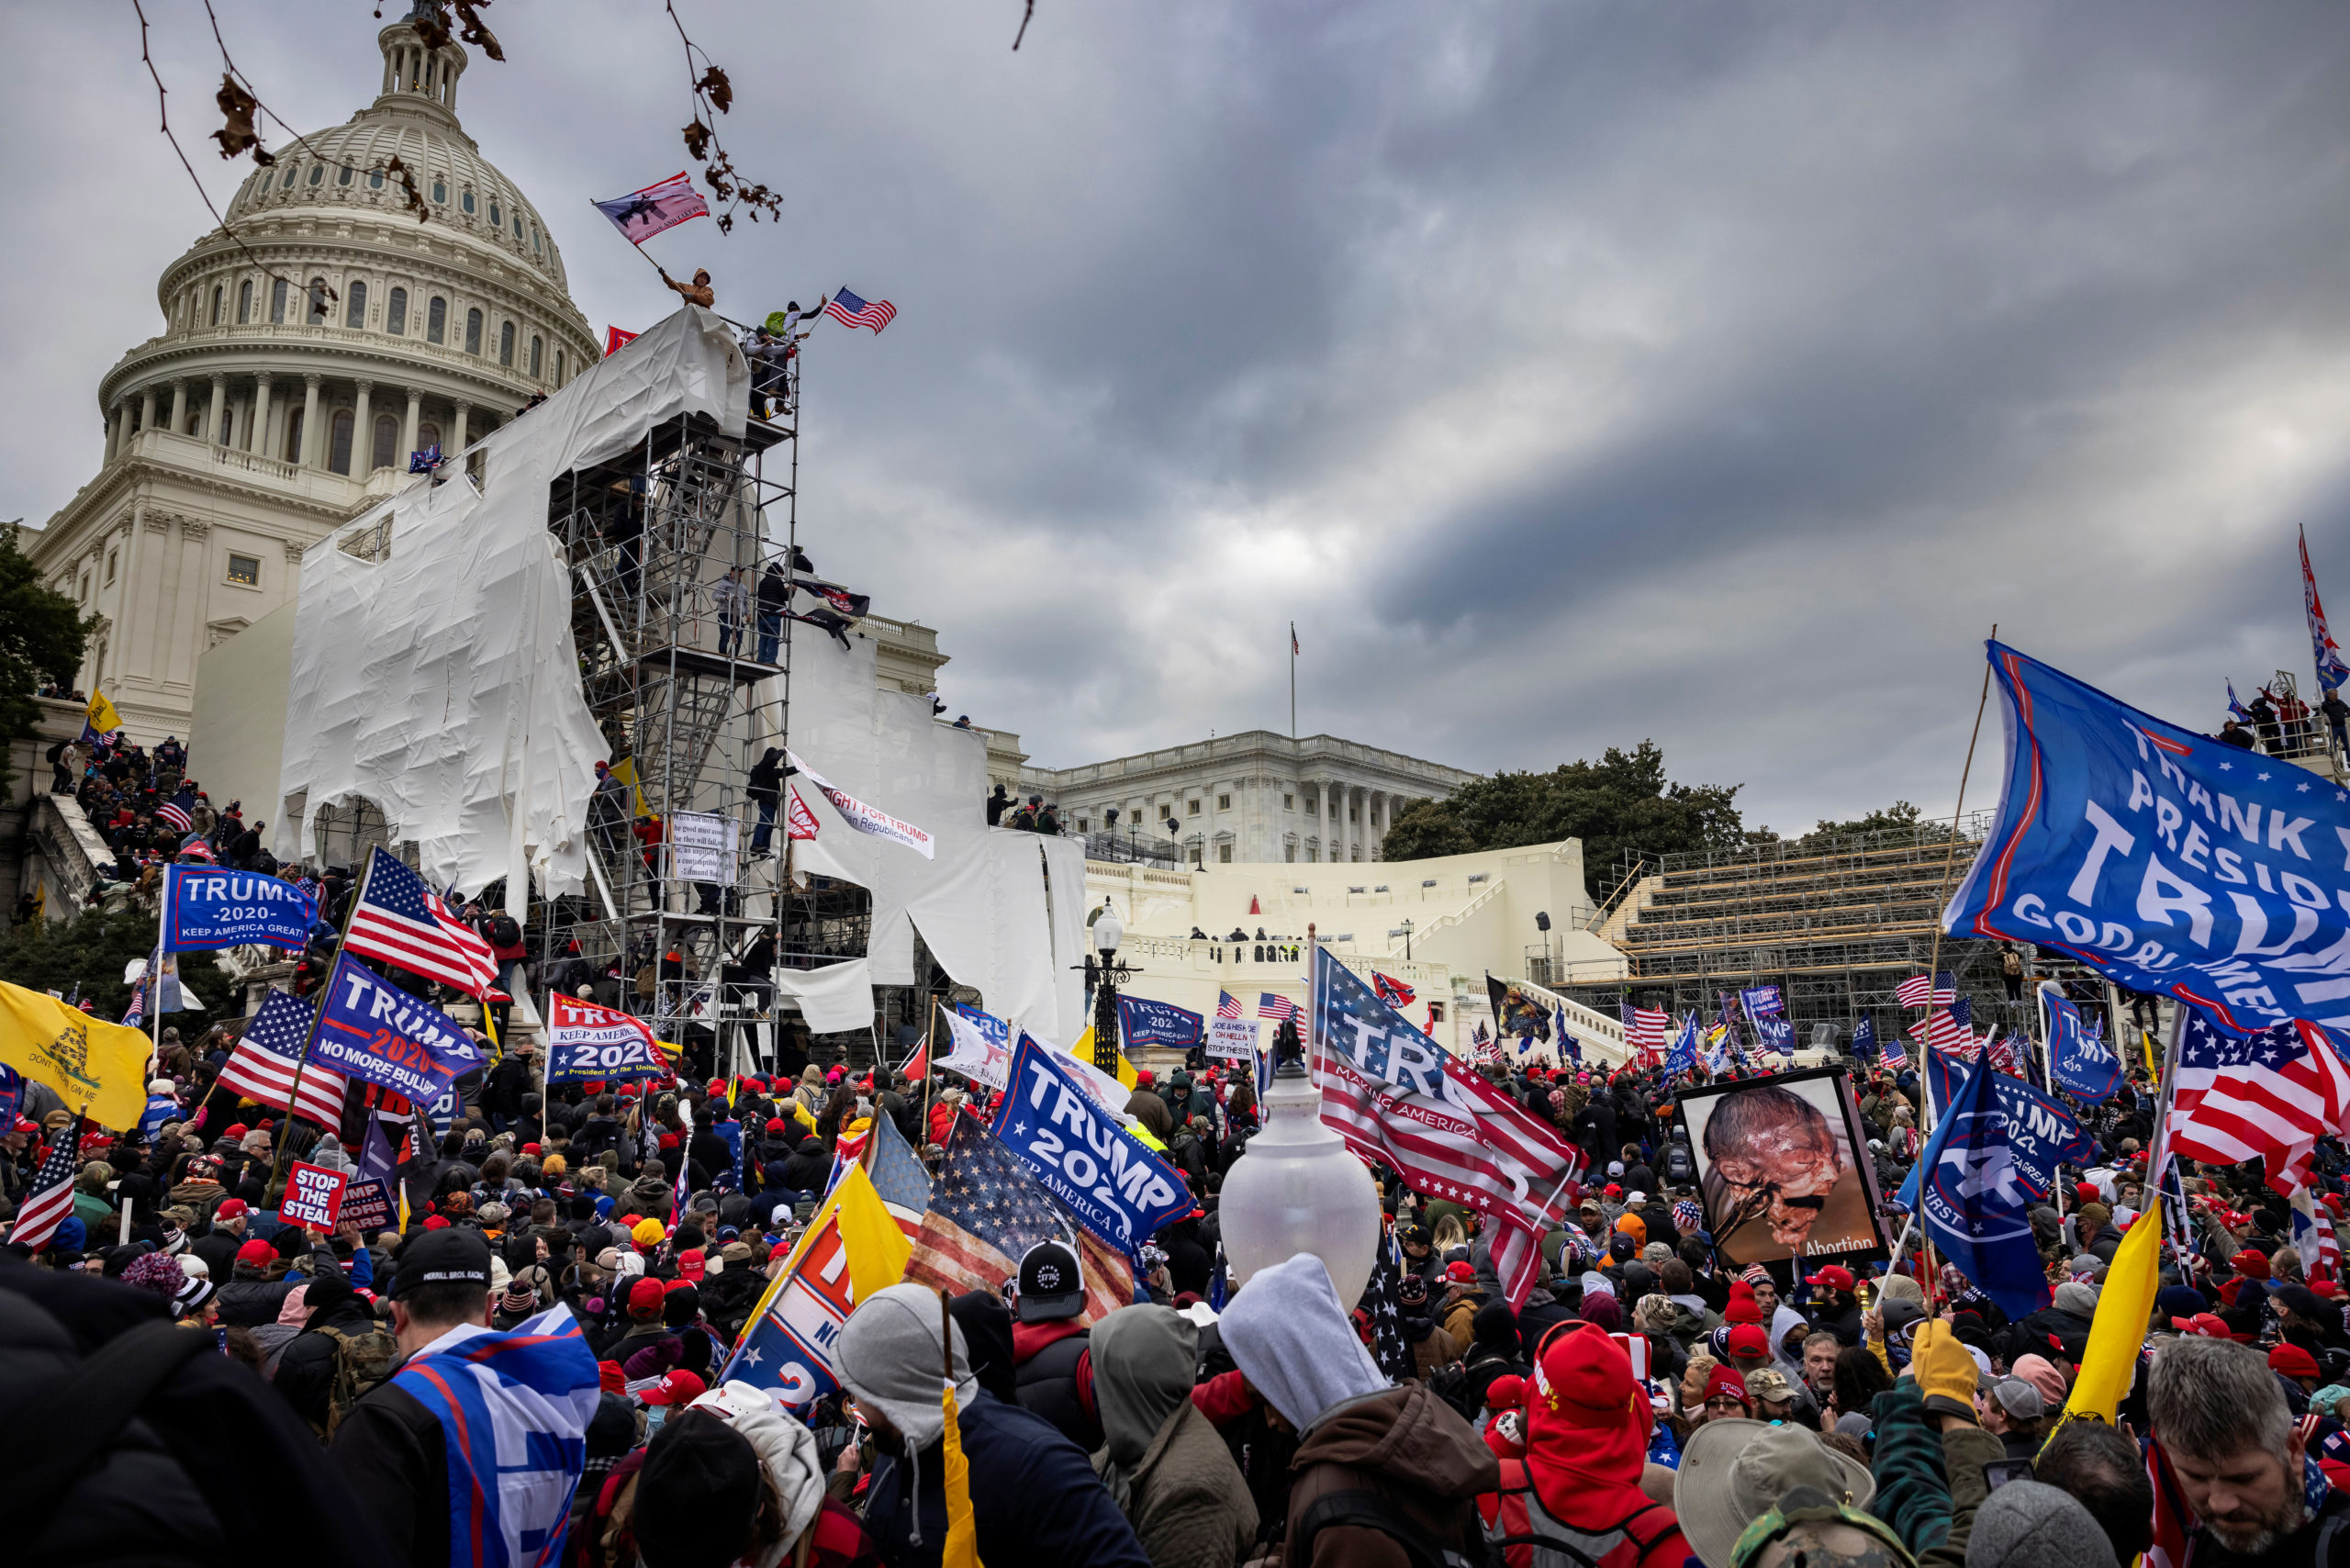 Trump supporters clash with police and security forces as people try to storm the US Capitol on January 6, 2021 in Washington, DC.